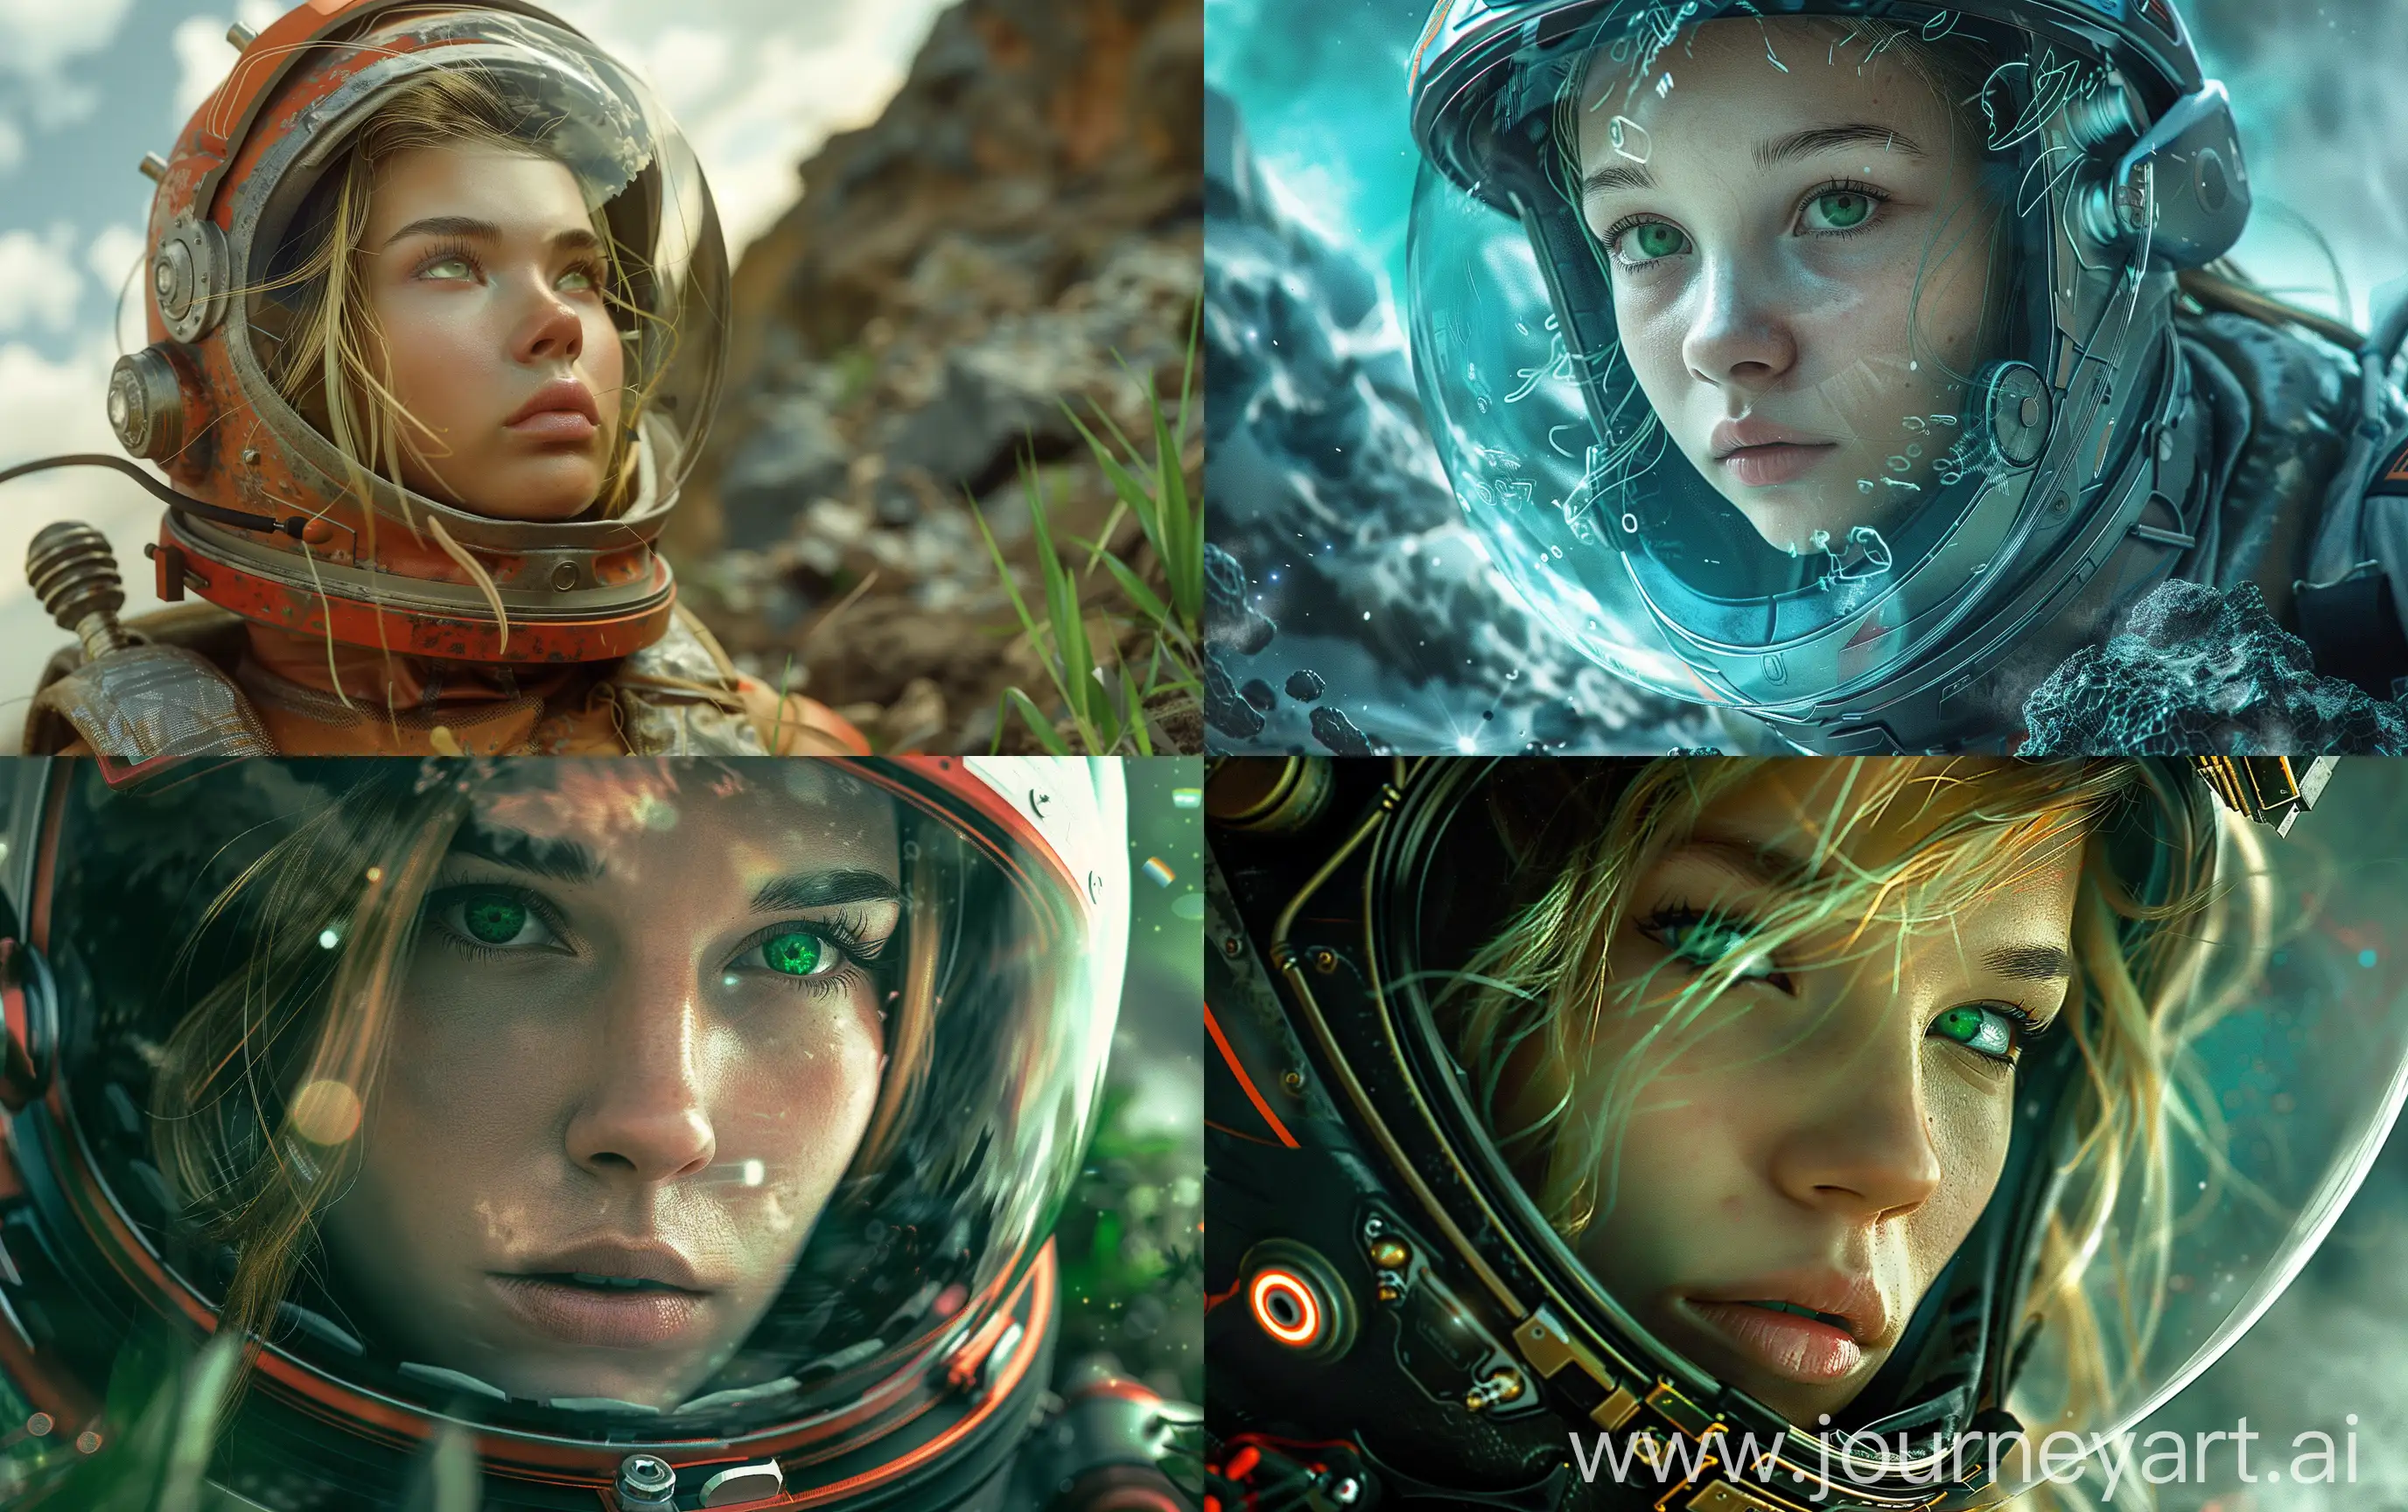 Blonde-Explorer-with-Green-Eyes-on-Russian-Spacesuit-Explores-Alien-Methane-Planet